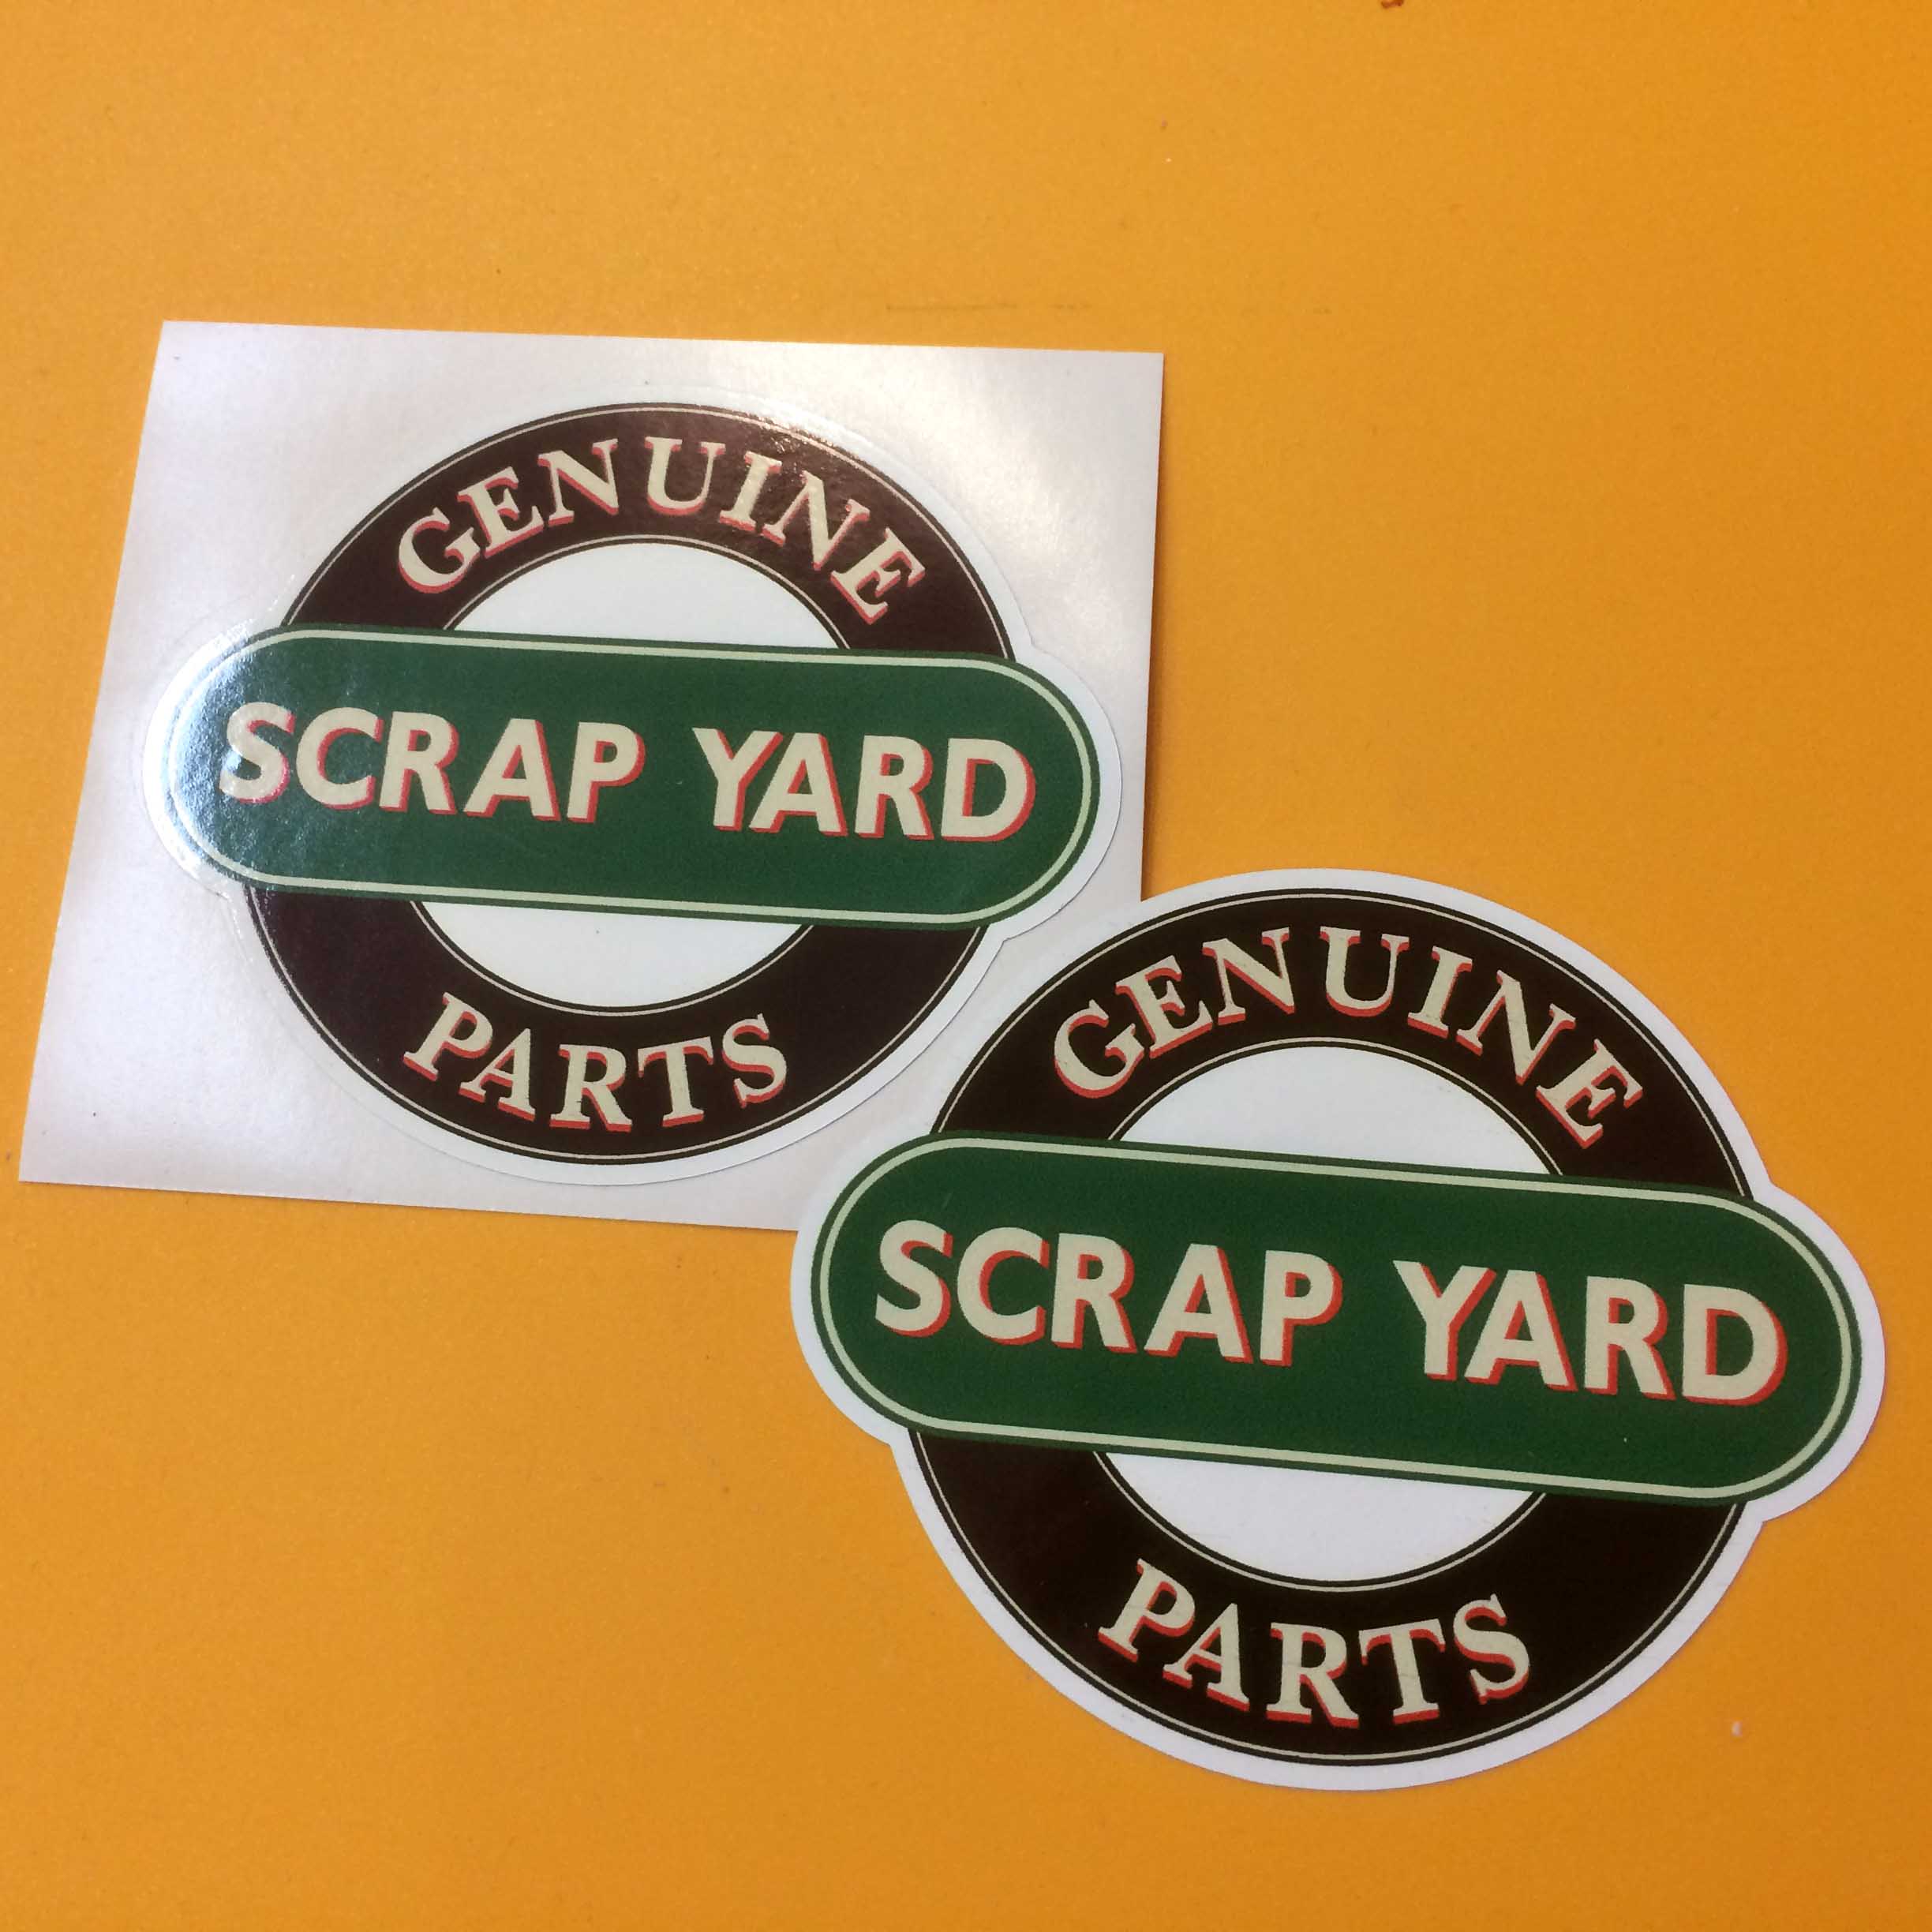 GENUINE SCRAP YARD PARTS STICKERS. Two concentric circles in black and white. Genuine Parts in red and white lettering surrounds the black outer circle. Scrap Yard on a green banner sits across the centre.